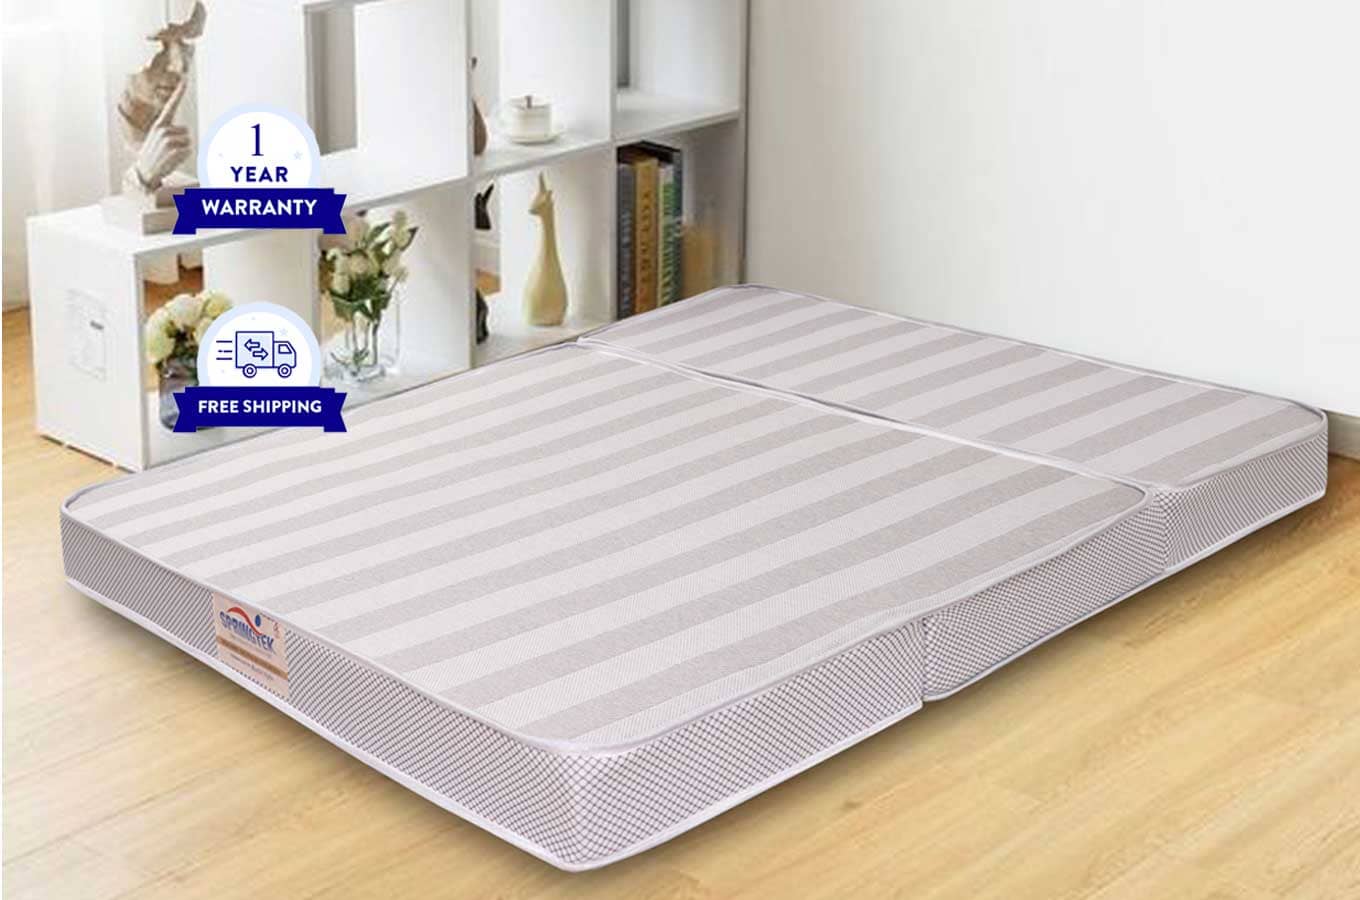 mattress that can be folded